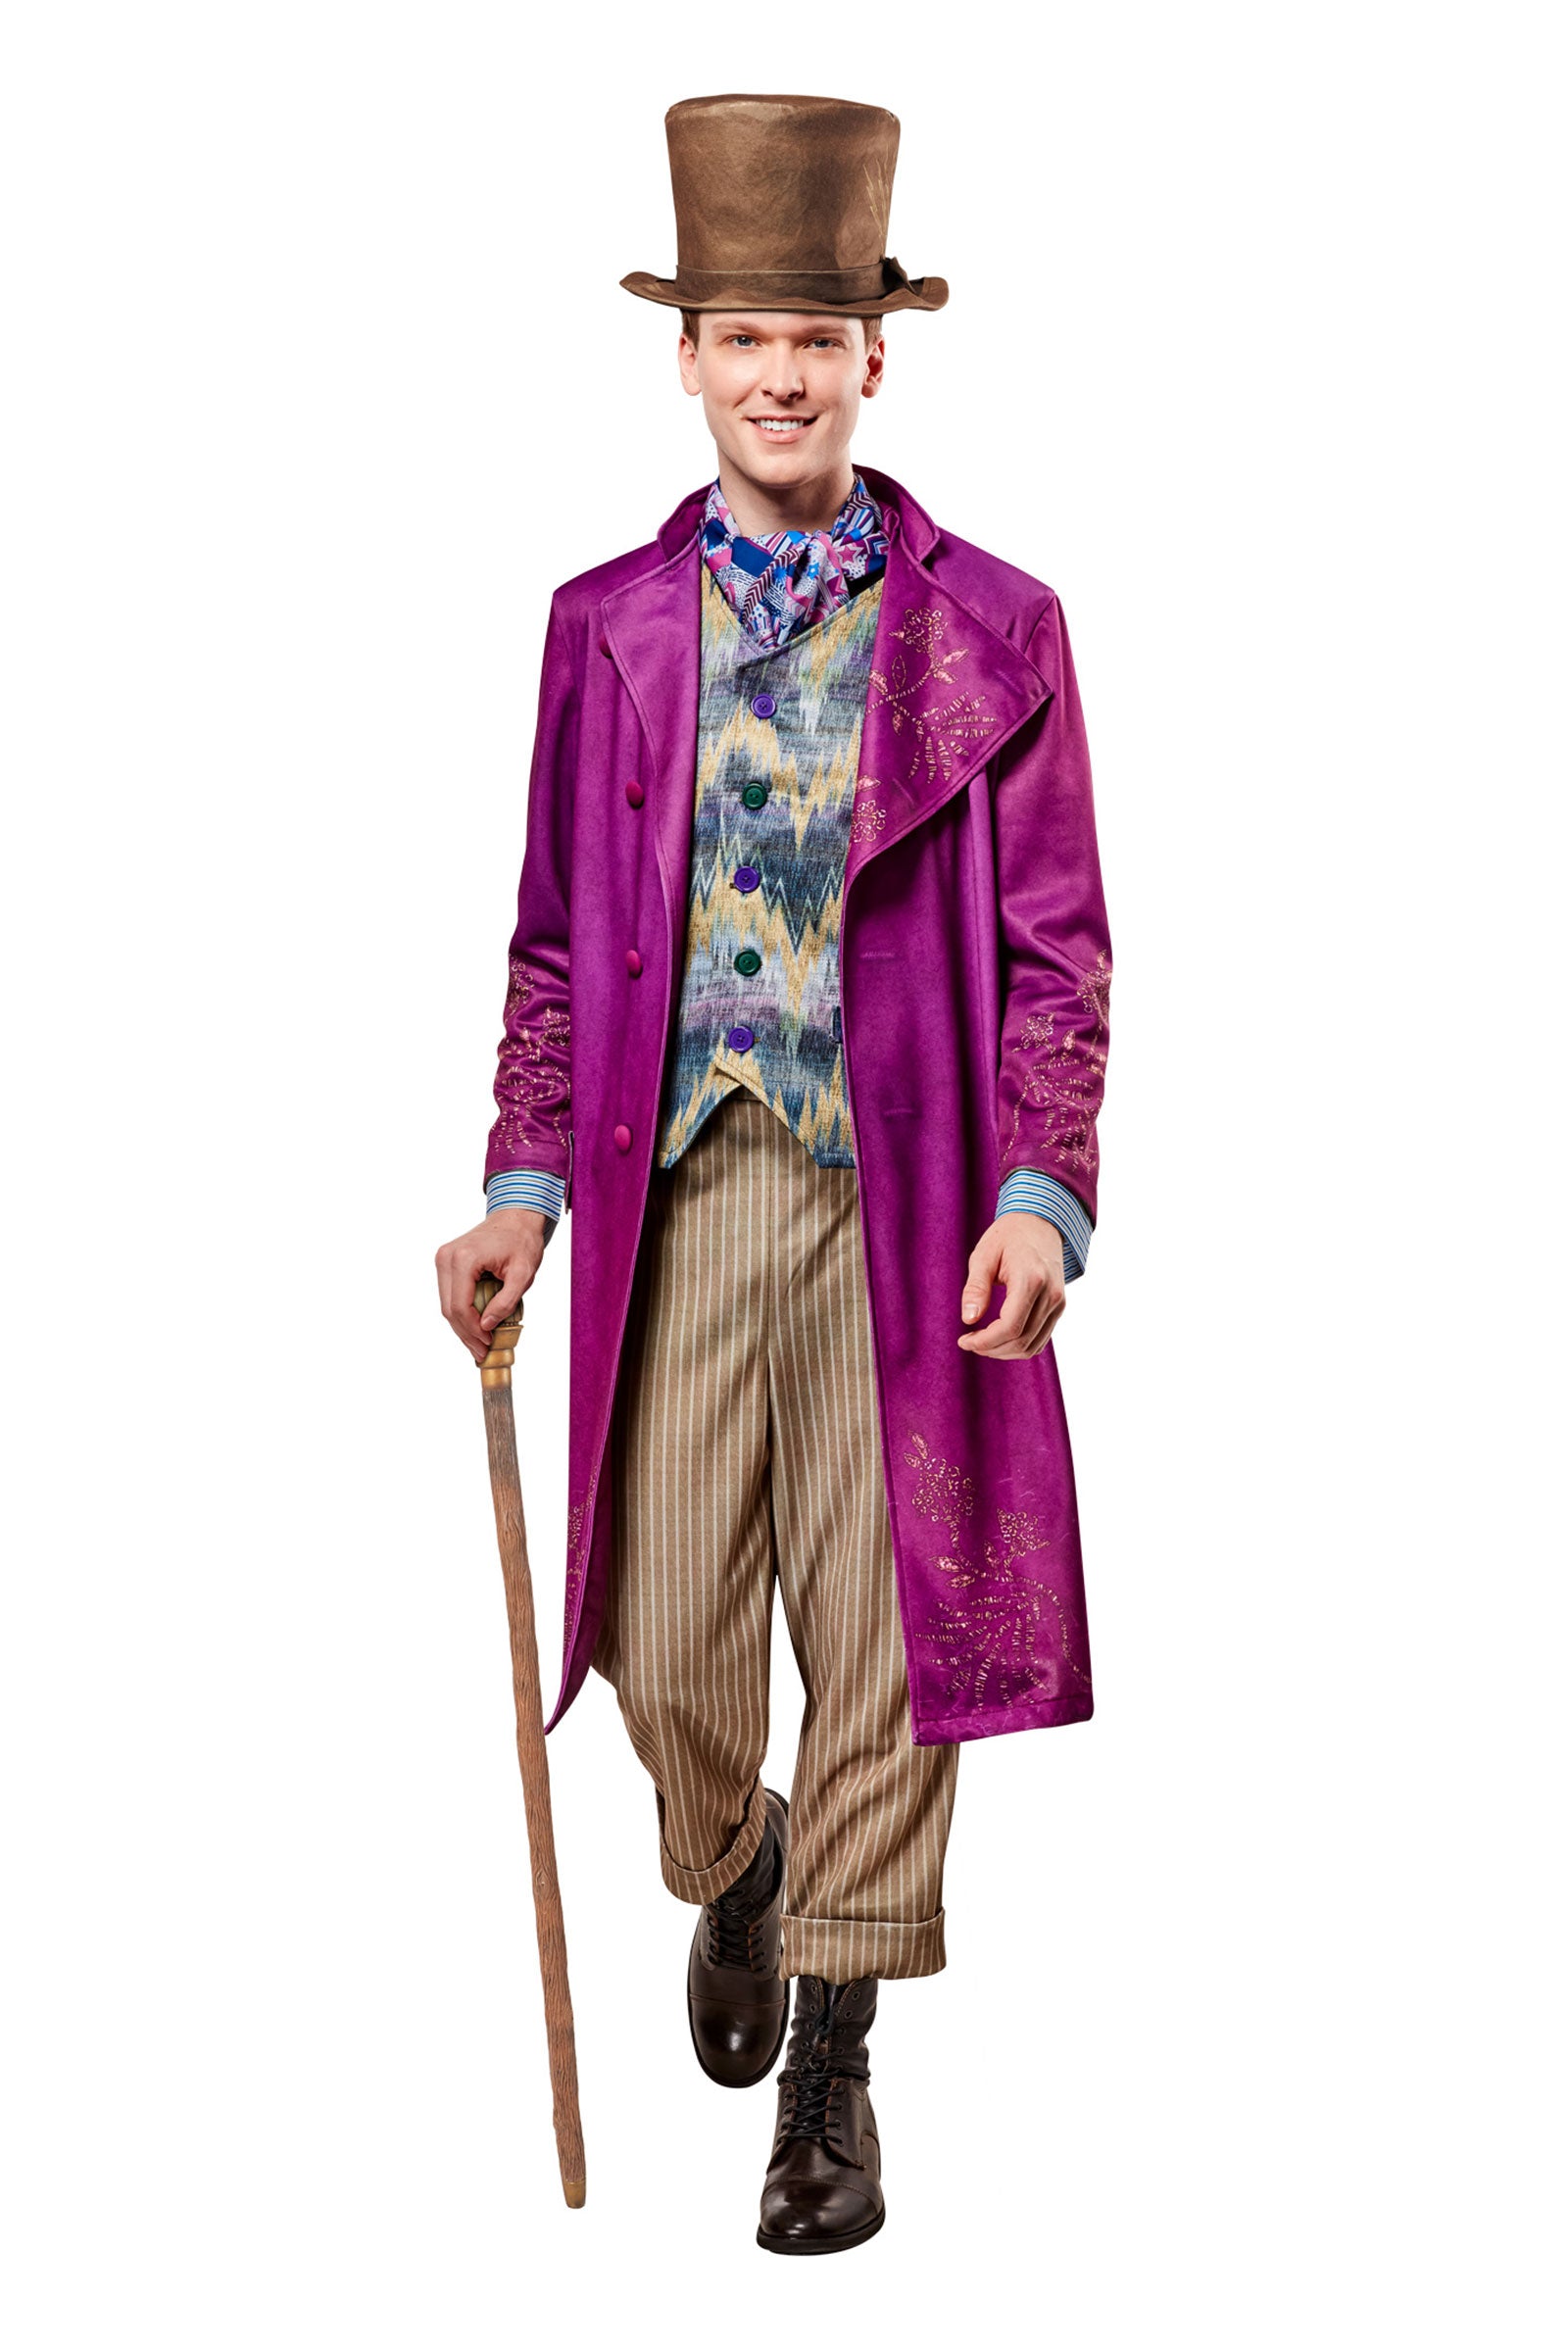 Willy Wonka Deluxe Adult Costume